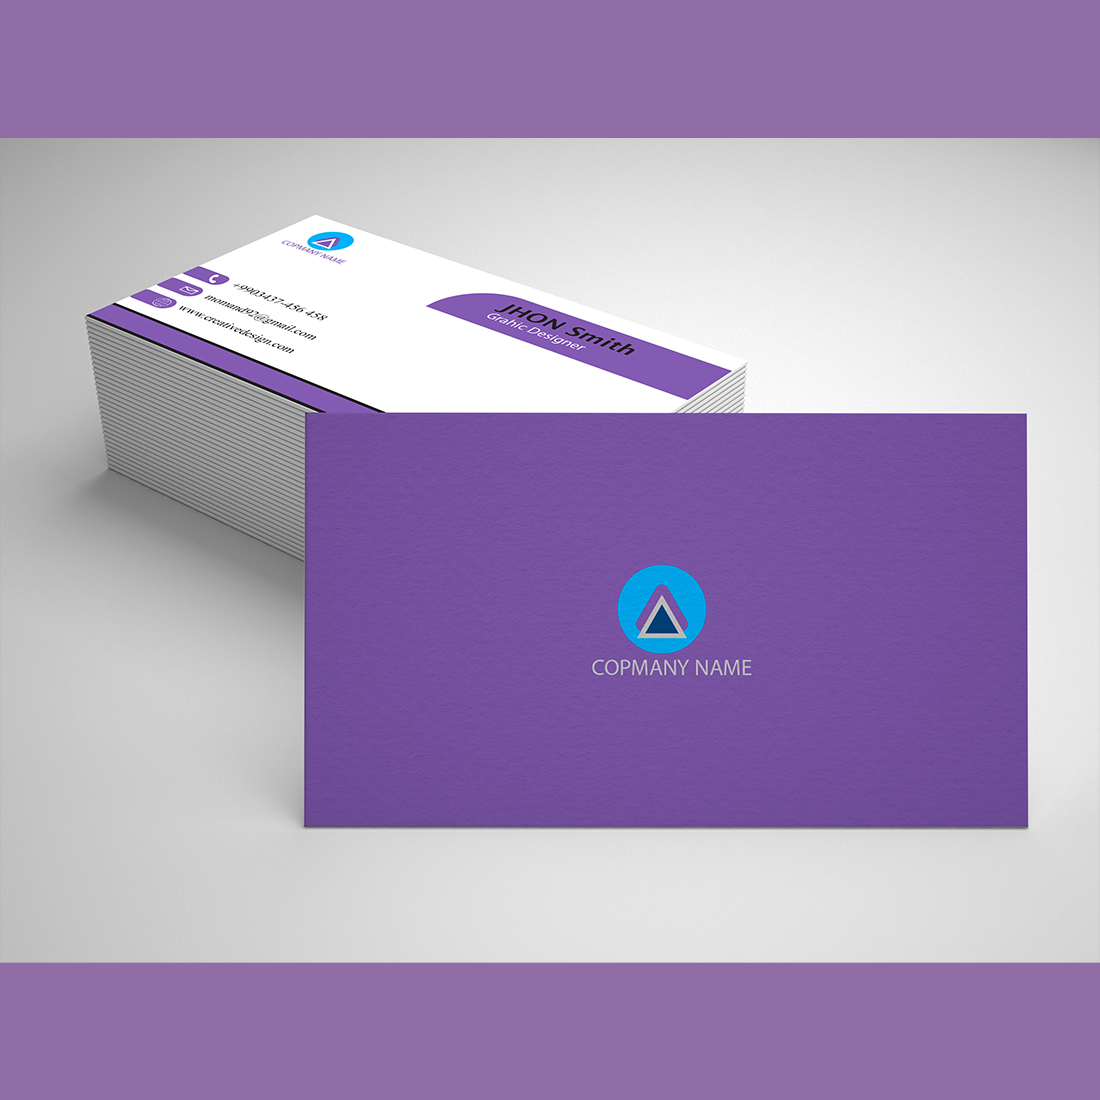 Modern Professional Business Cards cover image.